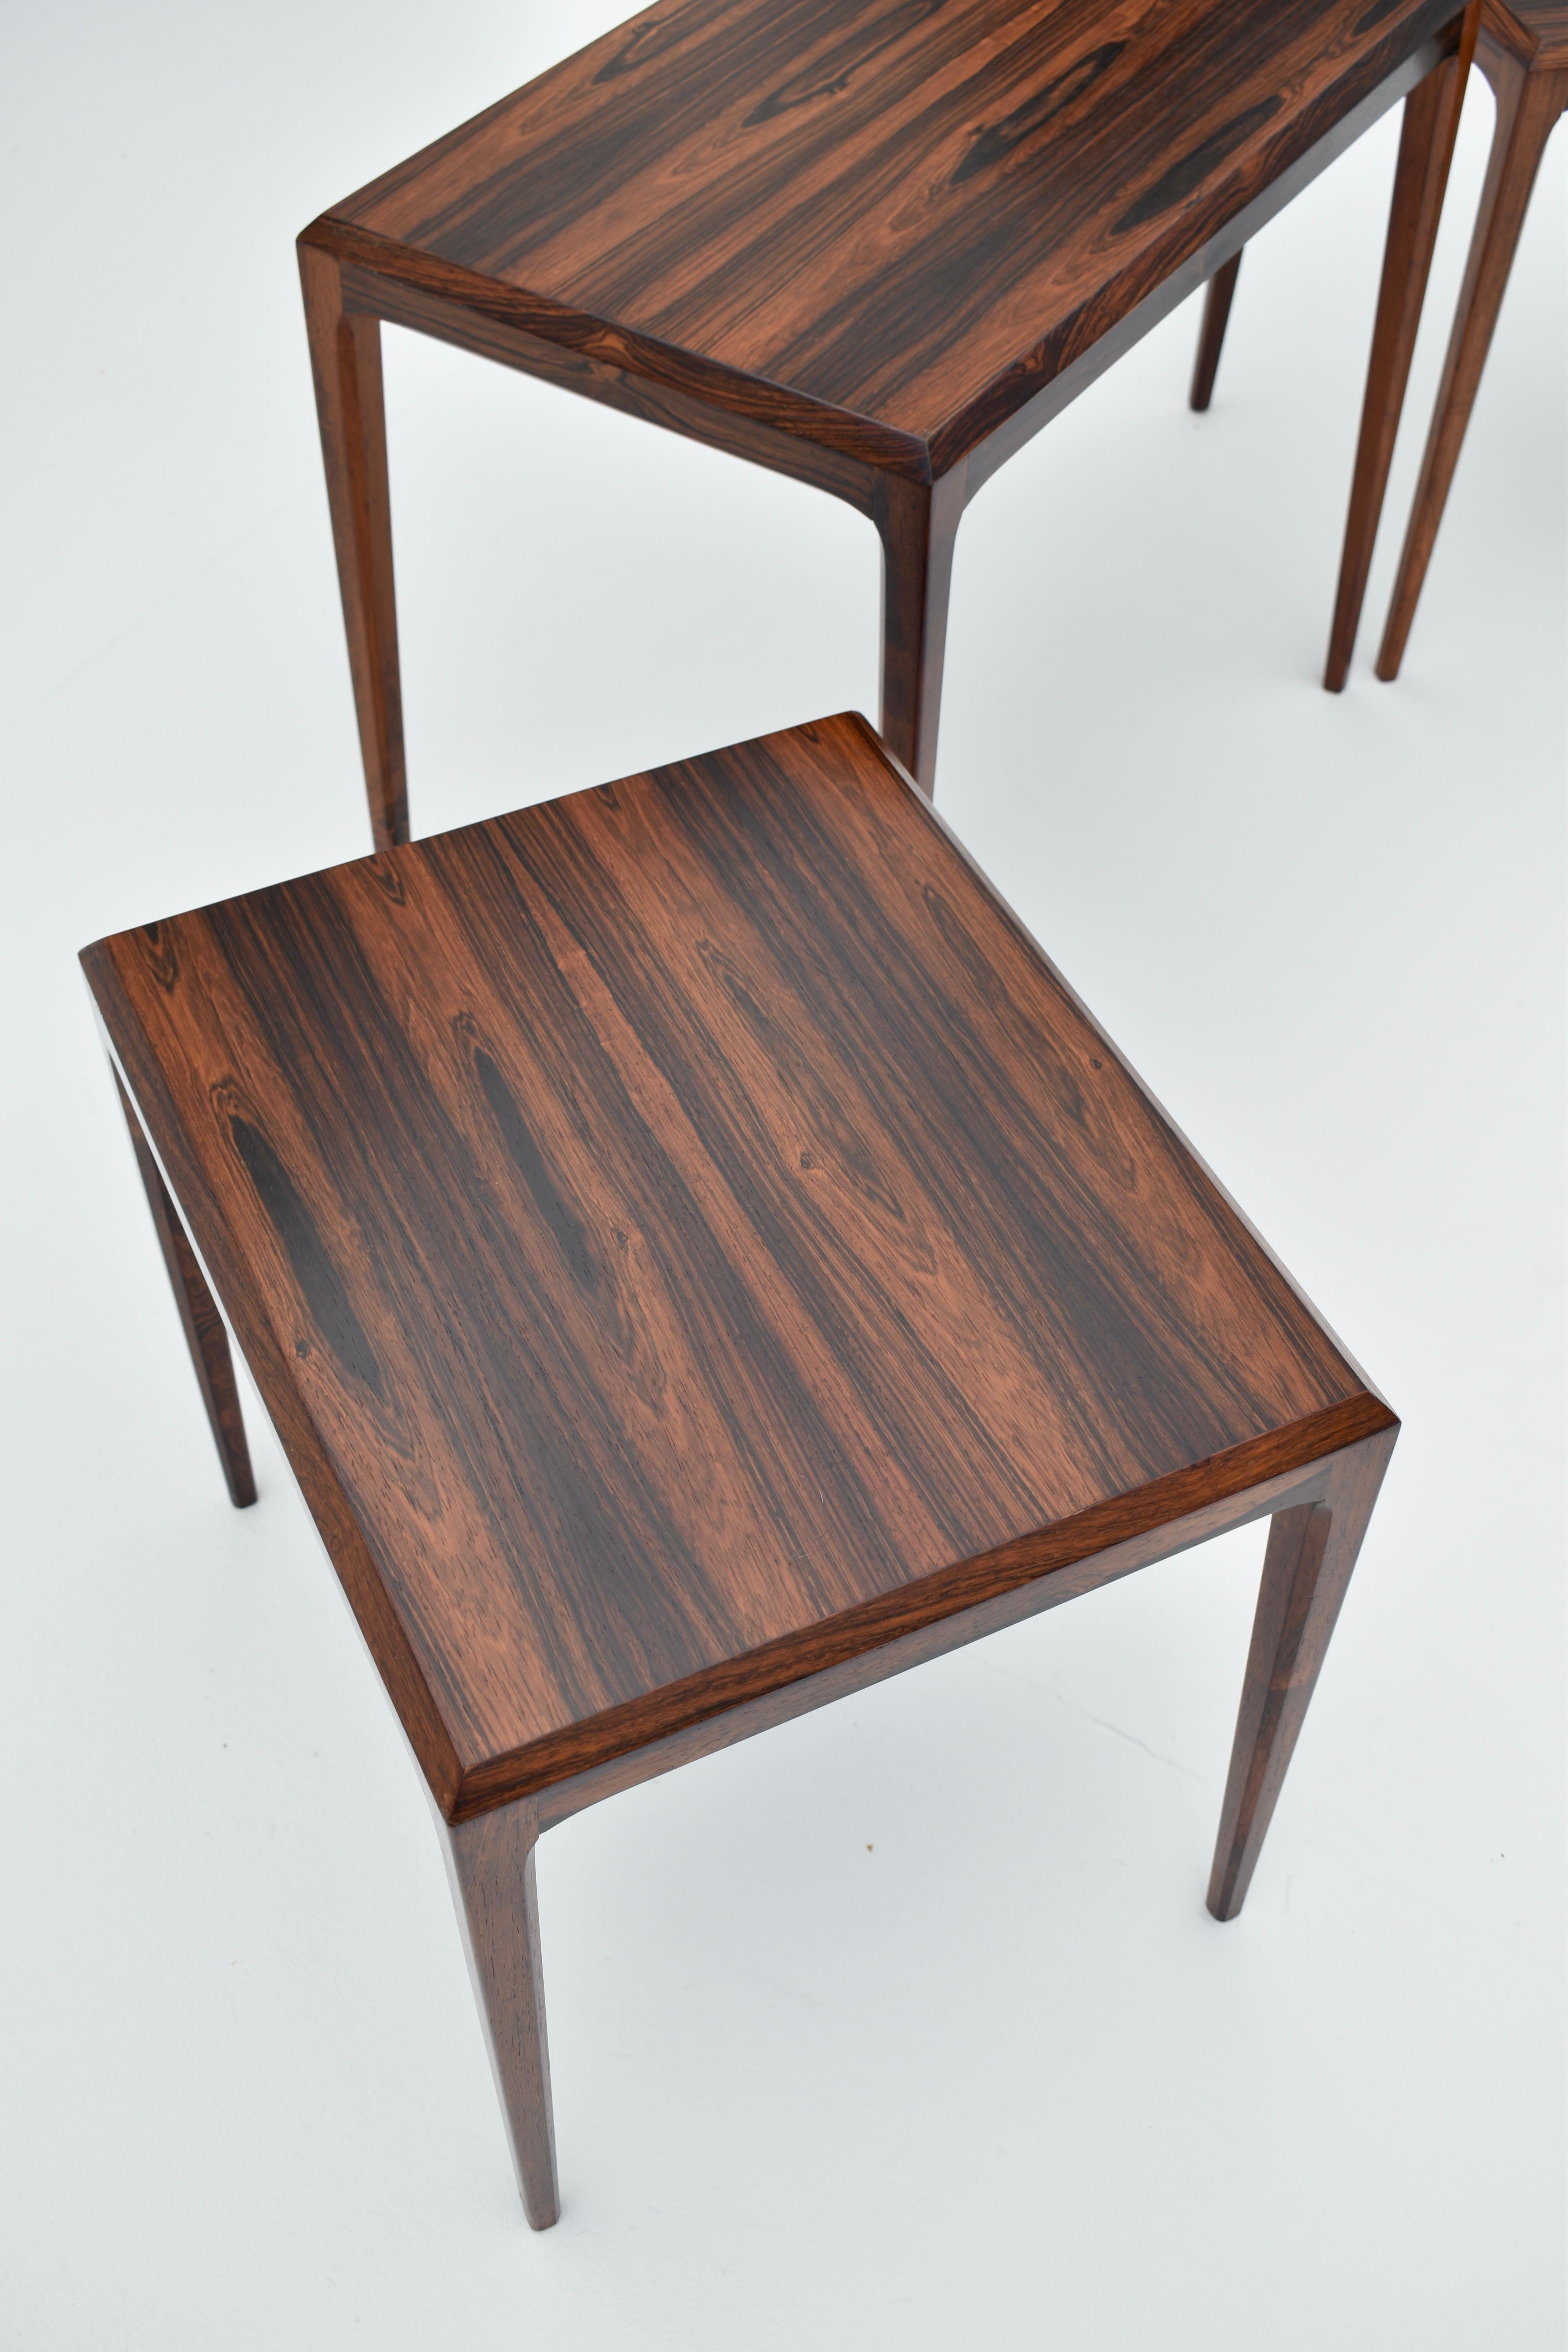 Mid-20th Century Midcentury Danish Set Of 3 Rosewood Nesting Tables BY Johannes Andersen For CFC For Sale